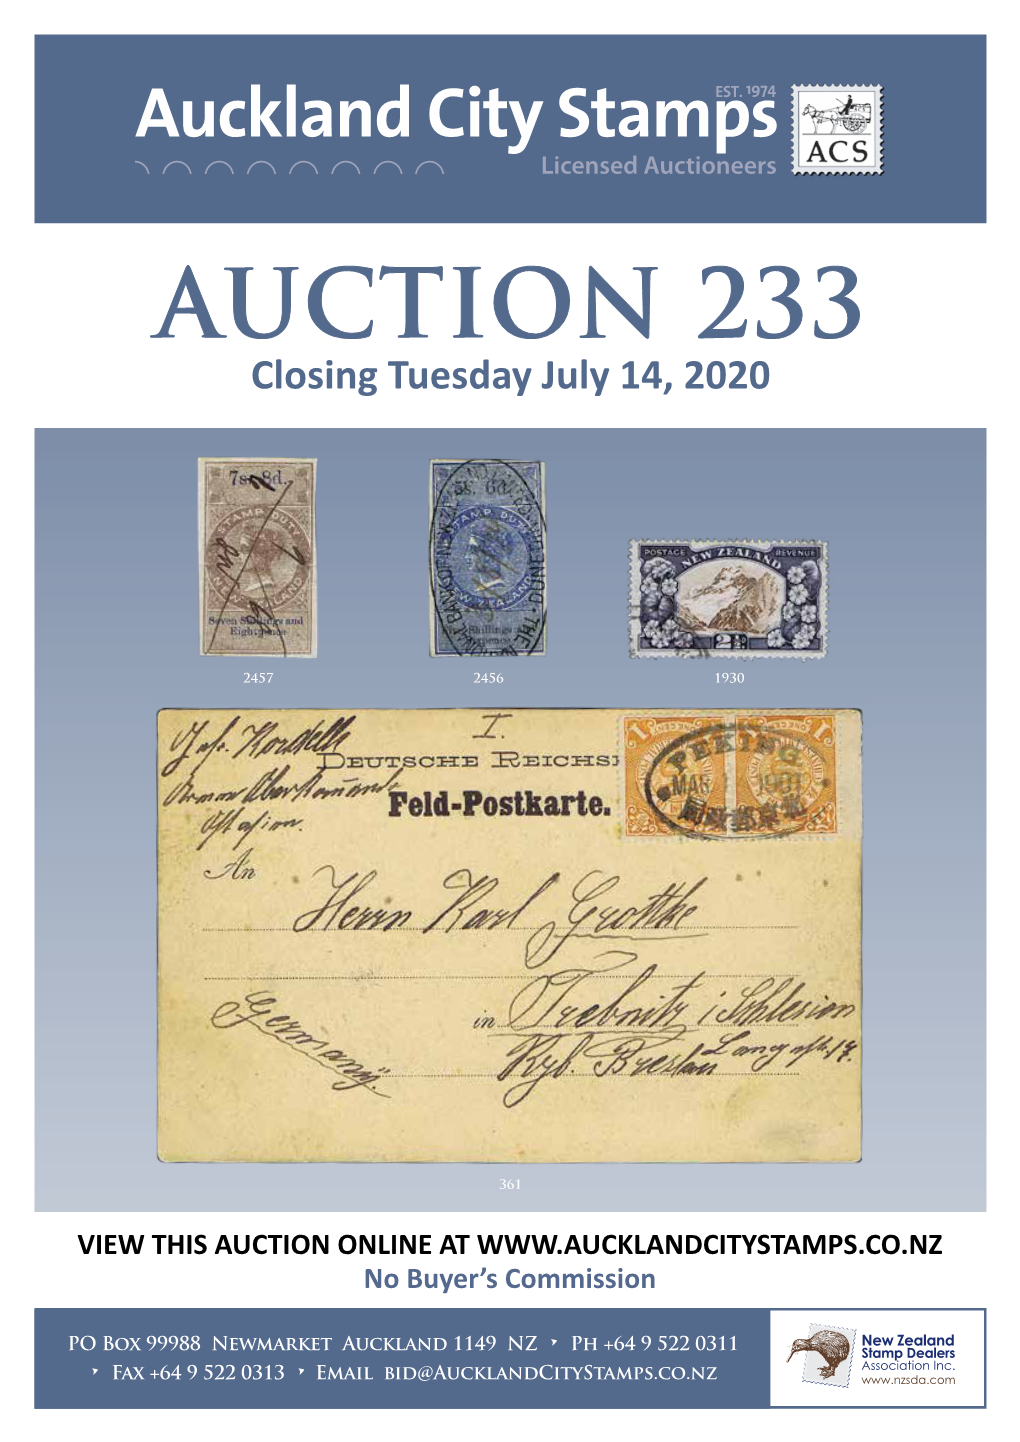 AUCTION 233 Closing Tuesday July 14, 2020